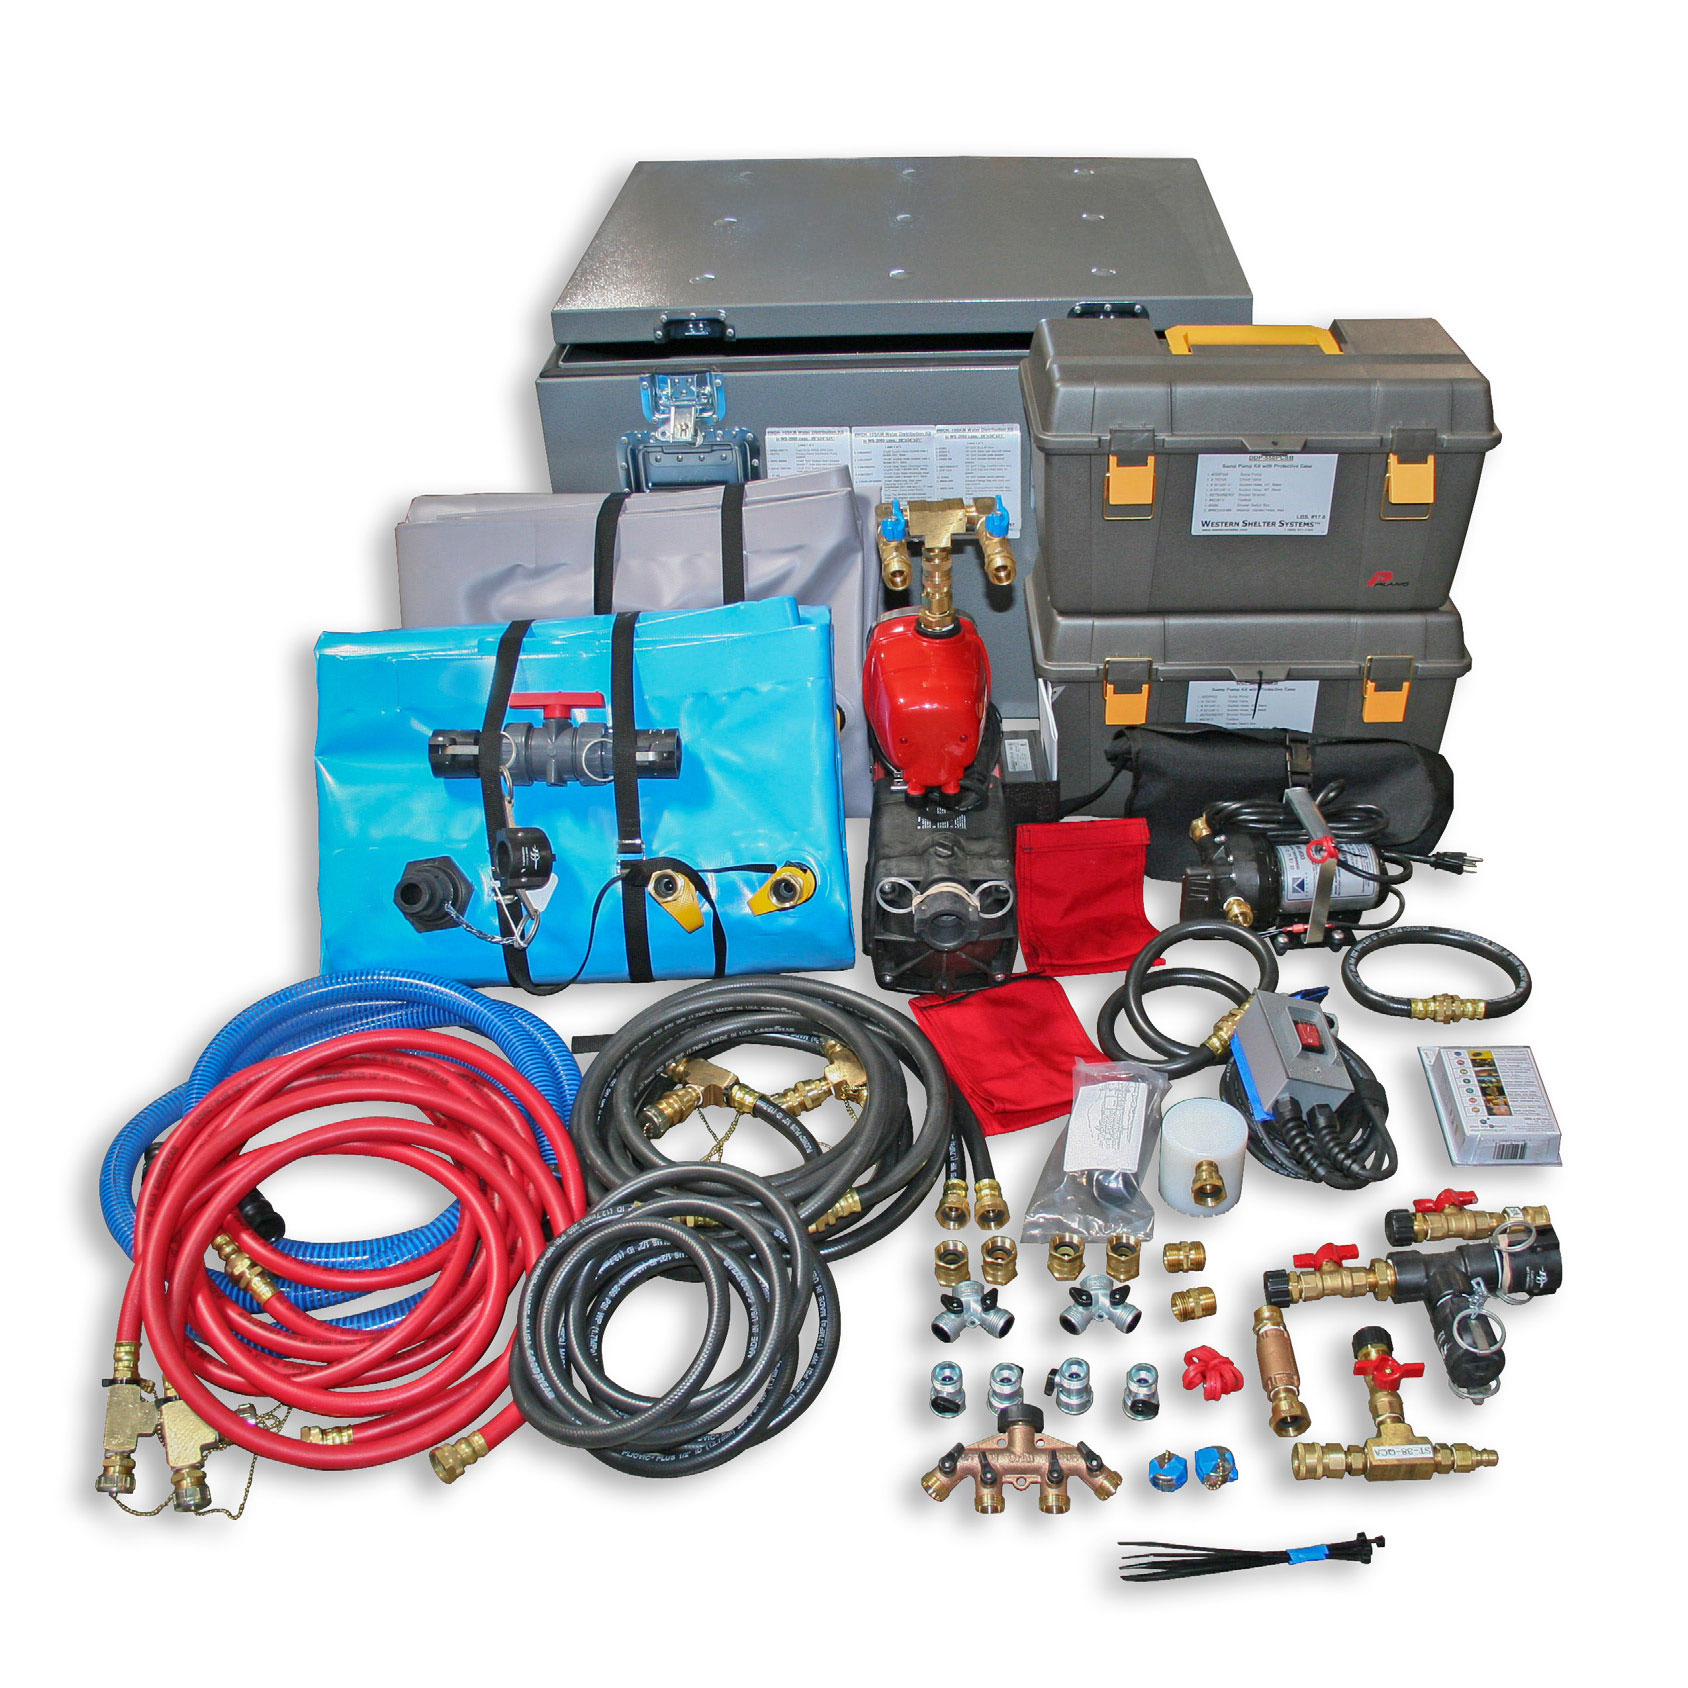 Western Shelter Systems WDK-10SK Water Distribution System Kits